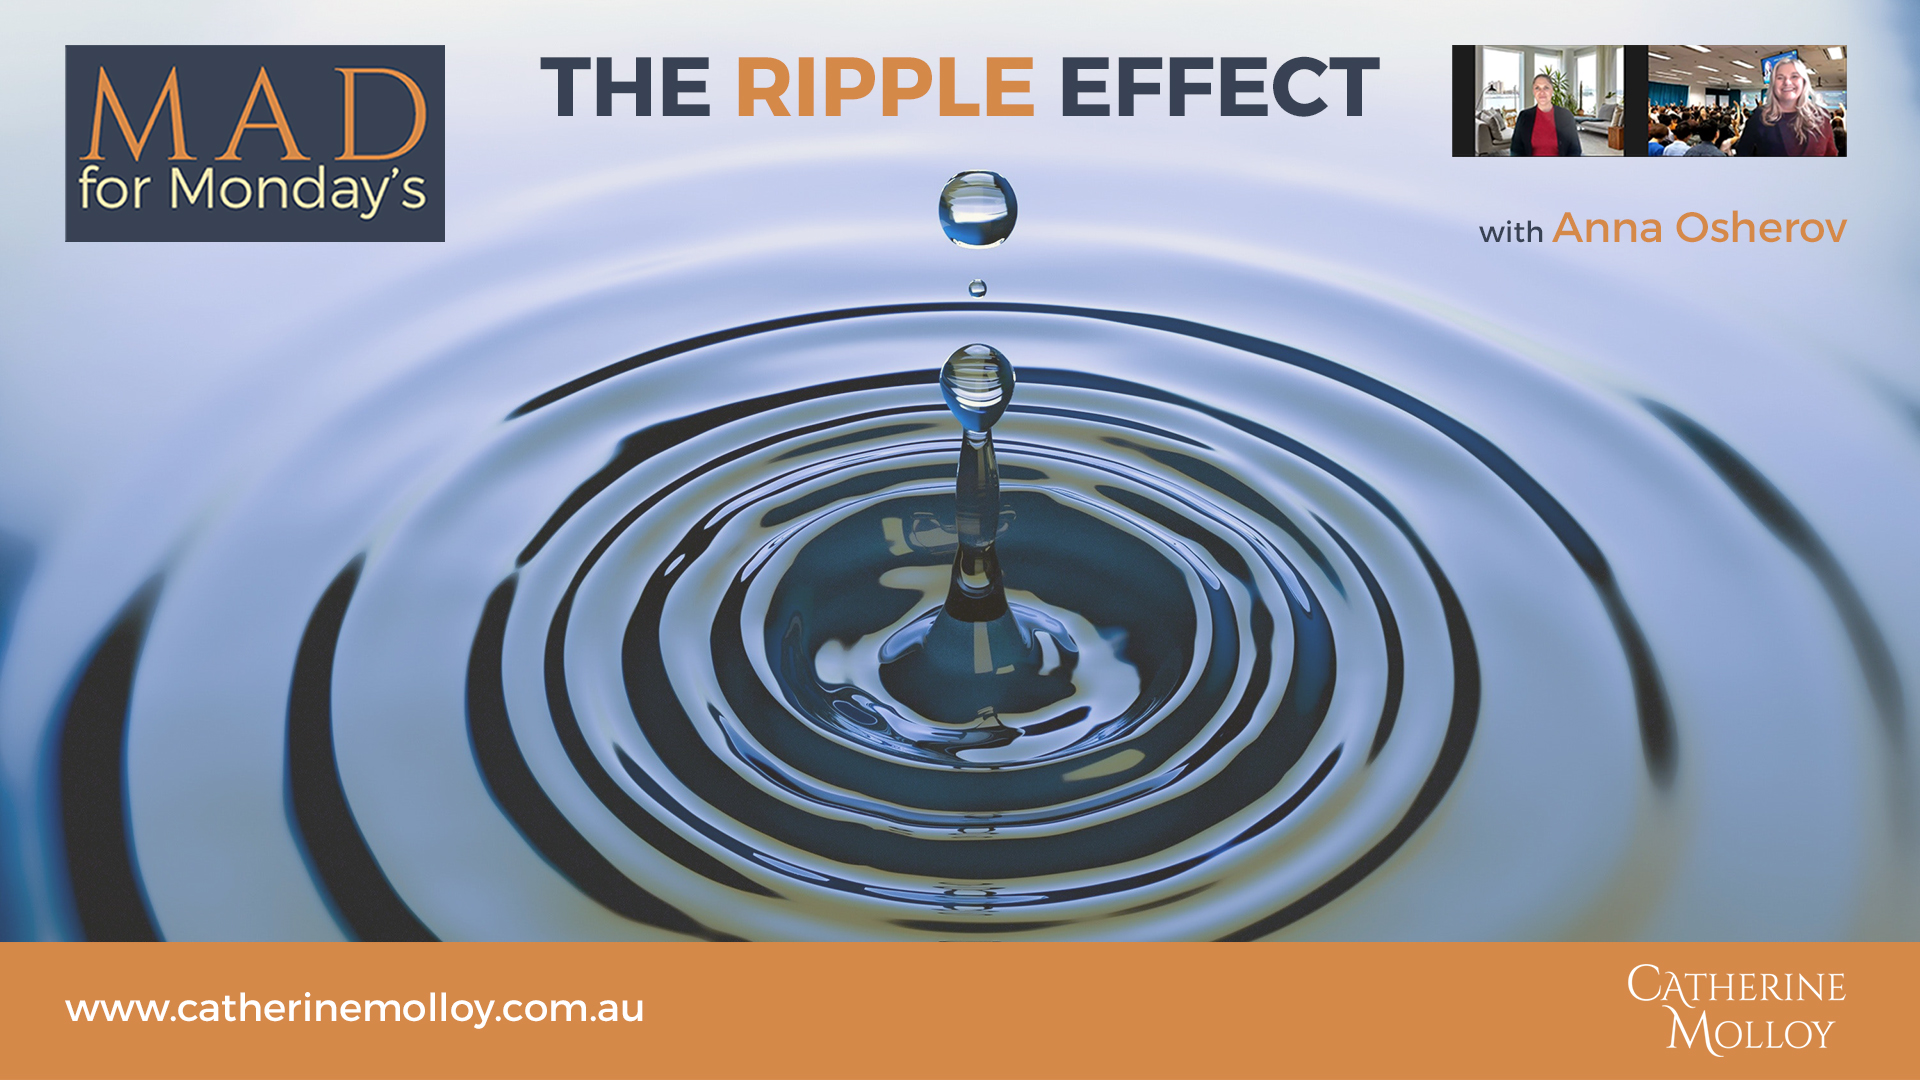 MAD for Monday’s – The Ripple Effect